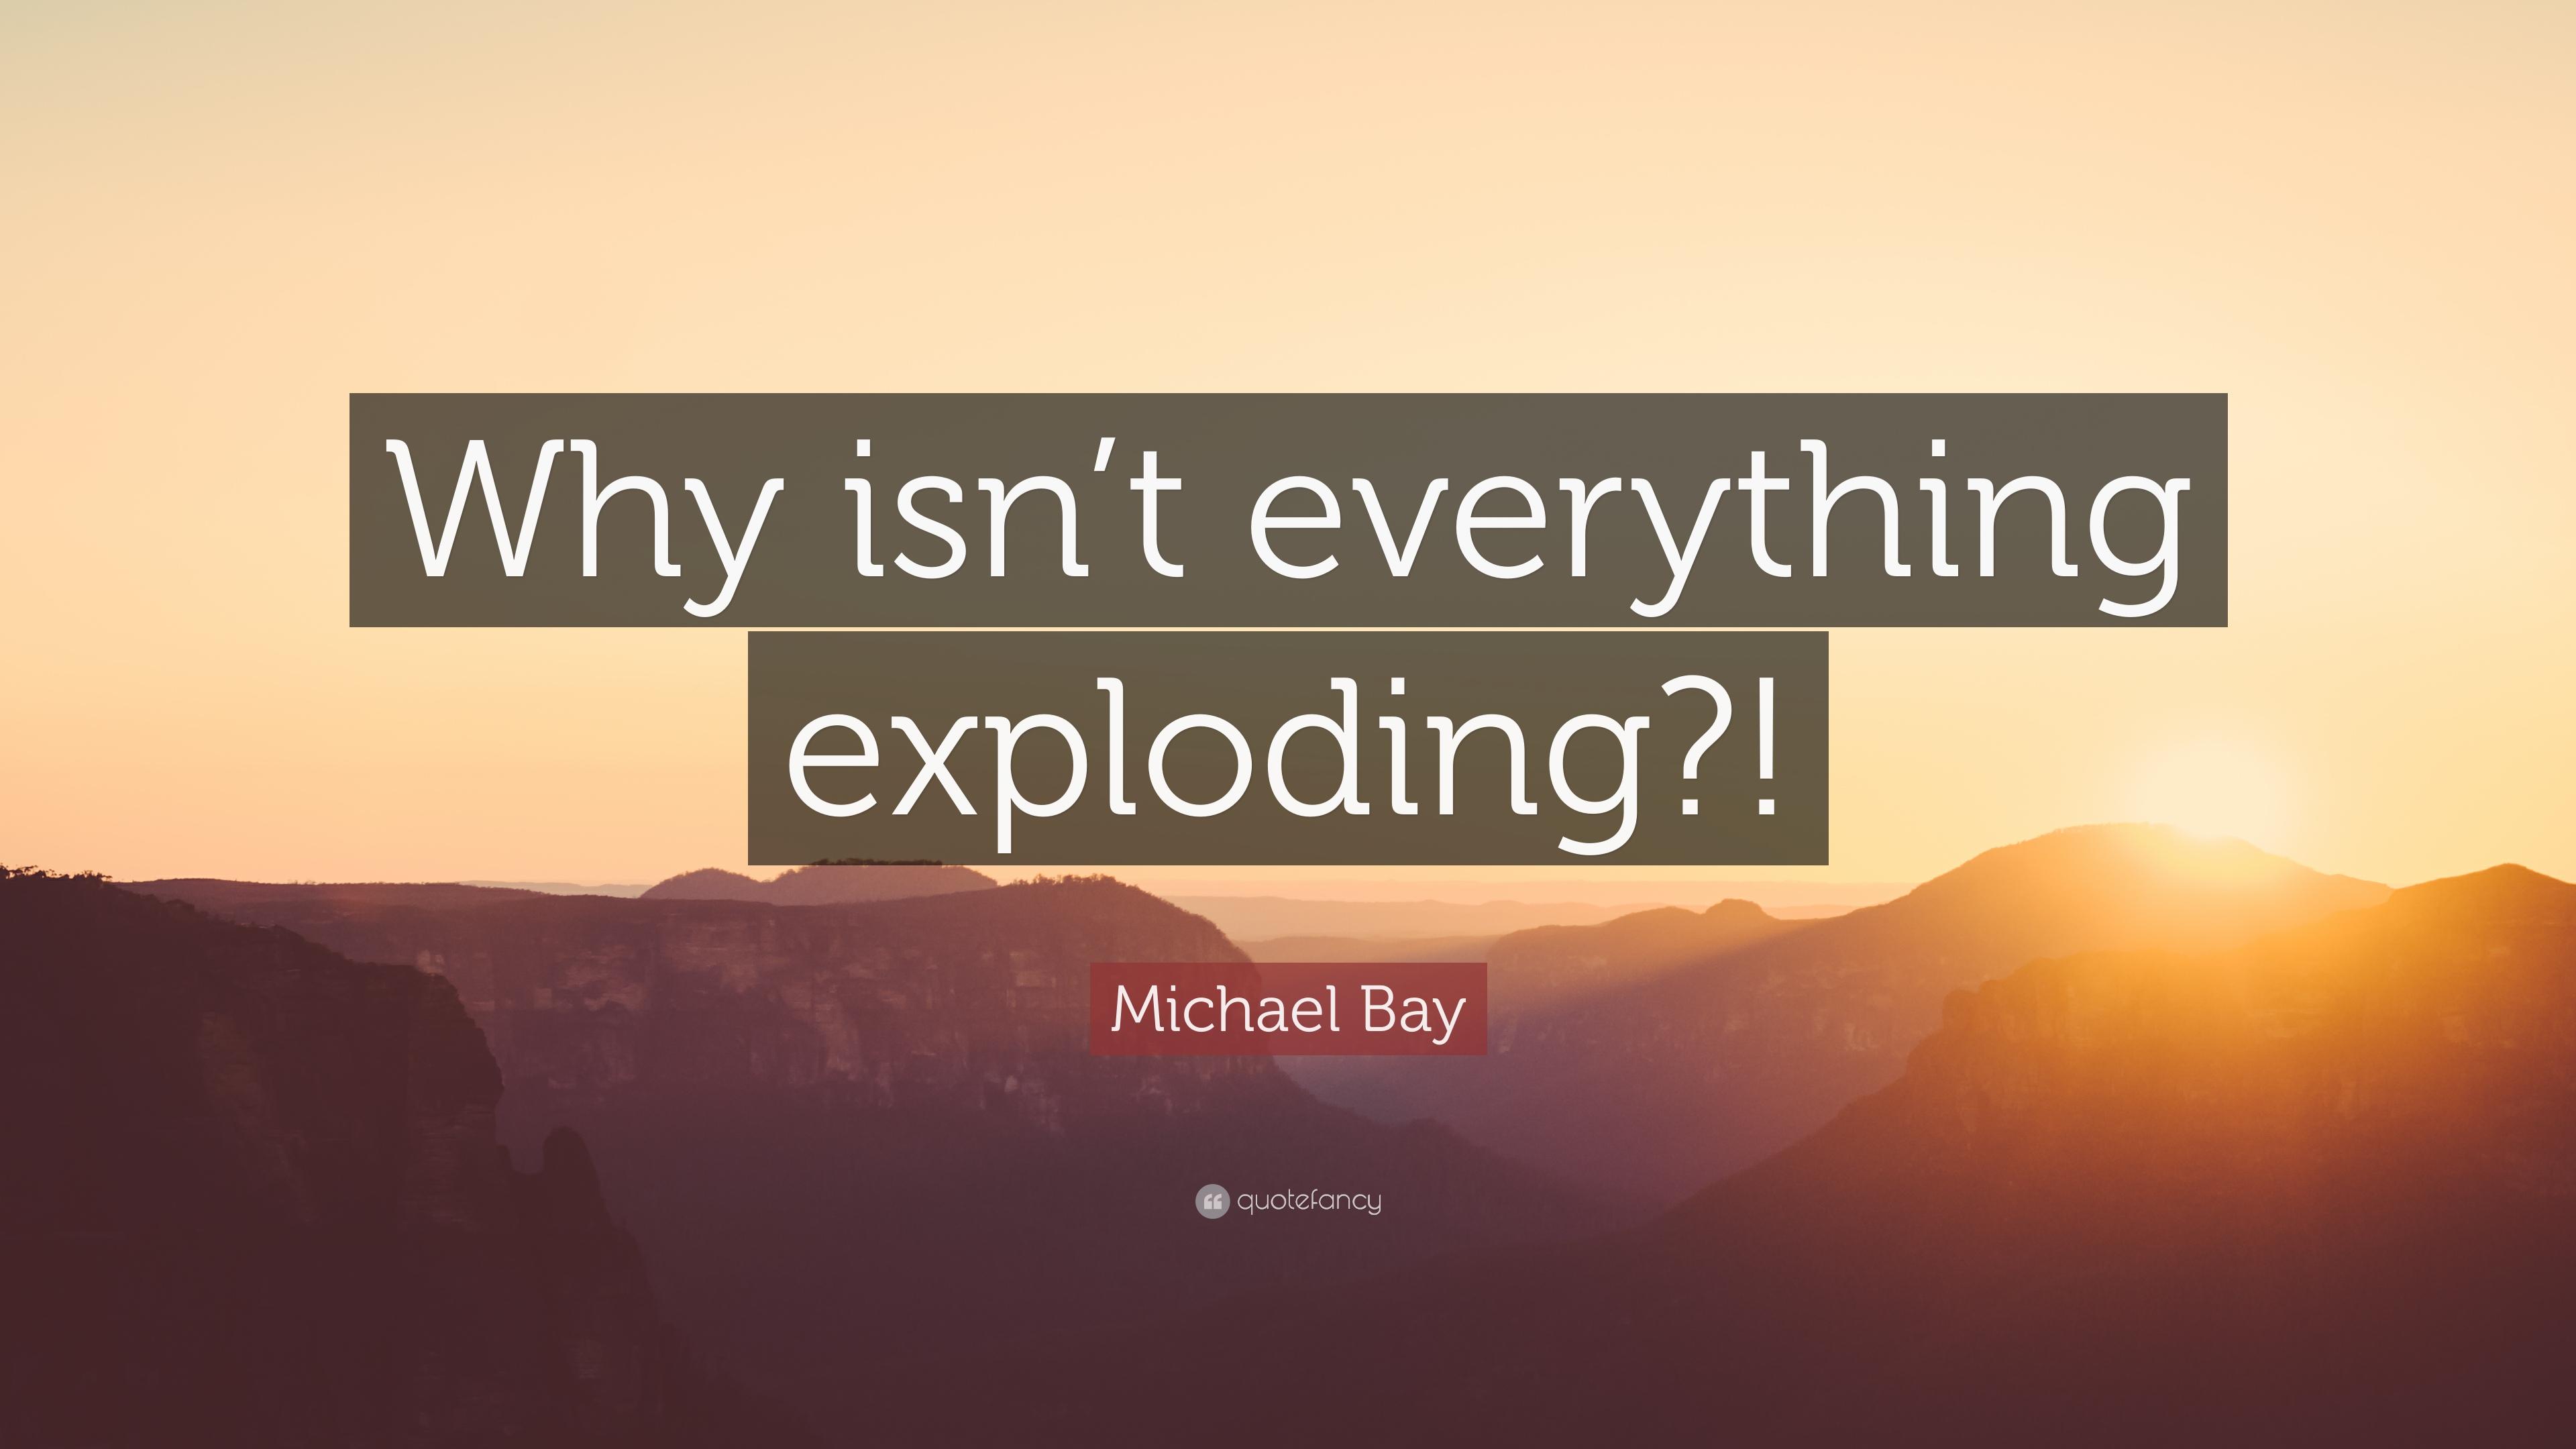 Michael Bay Quote: “Why isn't everything exploding?!” 7 wallpaper